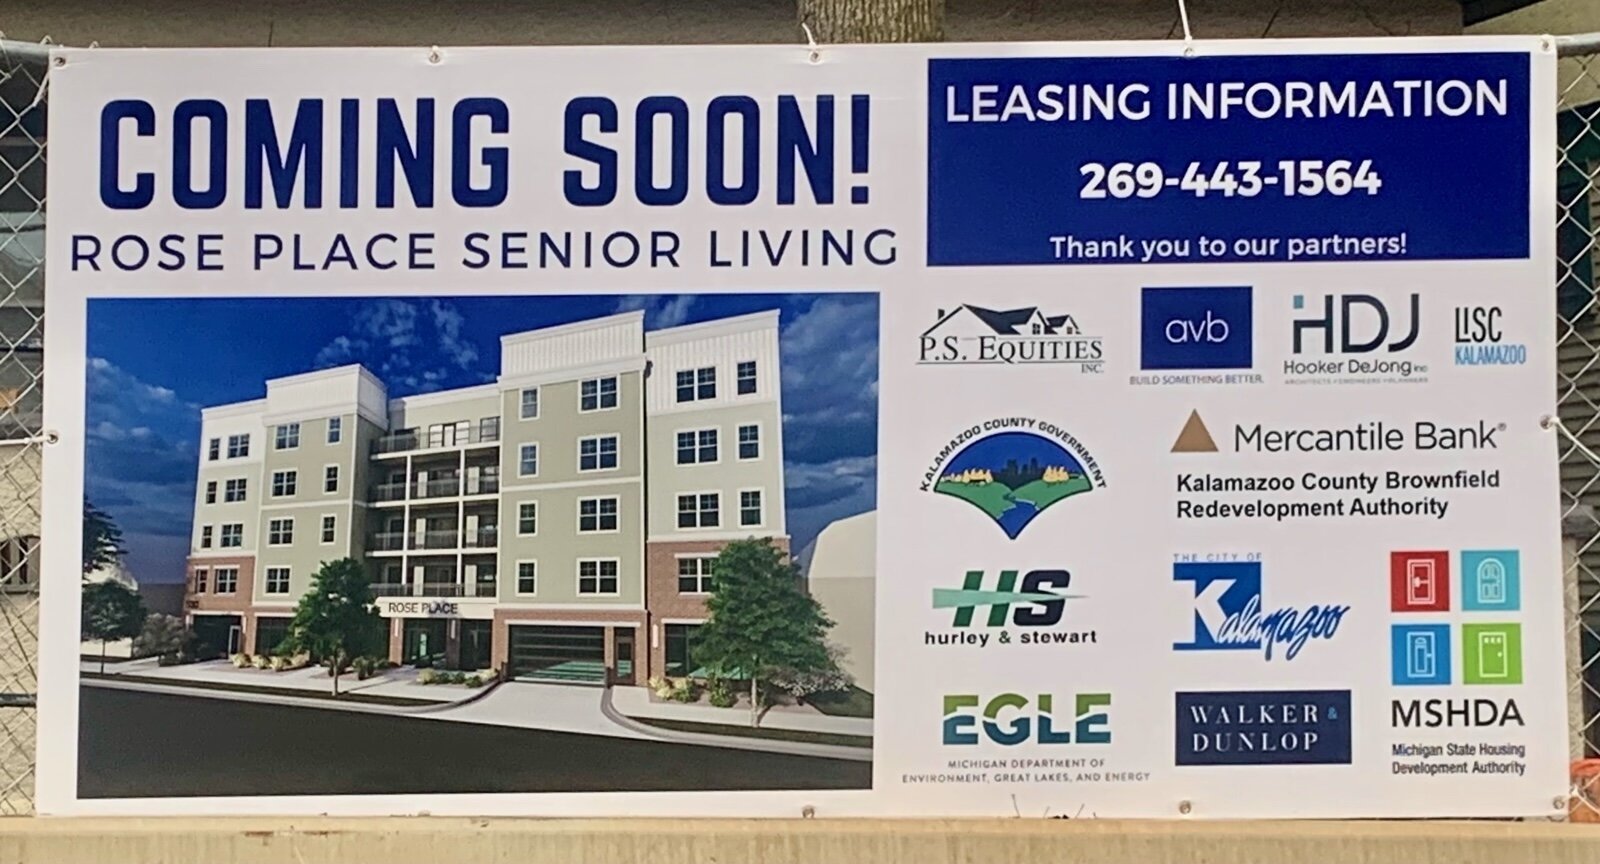 Rose Place Senior Living is one of several affordable housing projects that is receiving funding through Kalamazoo County’s 3-year-old Housing Millage.